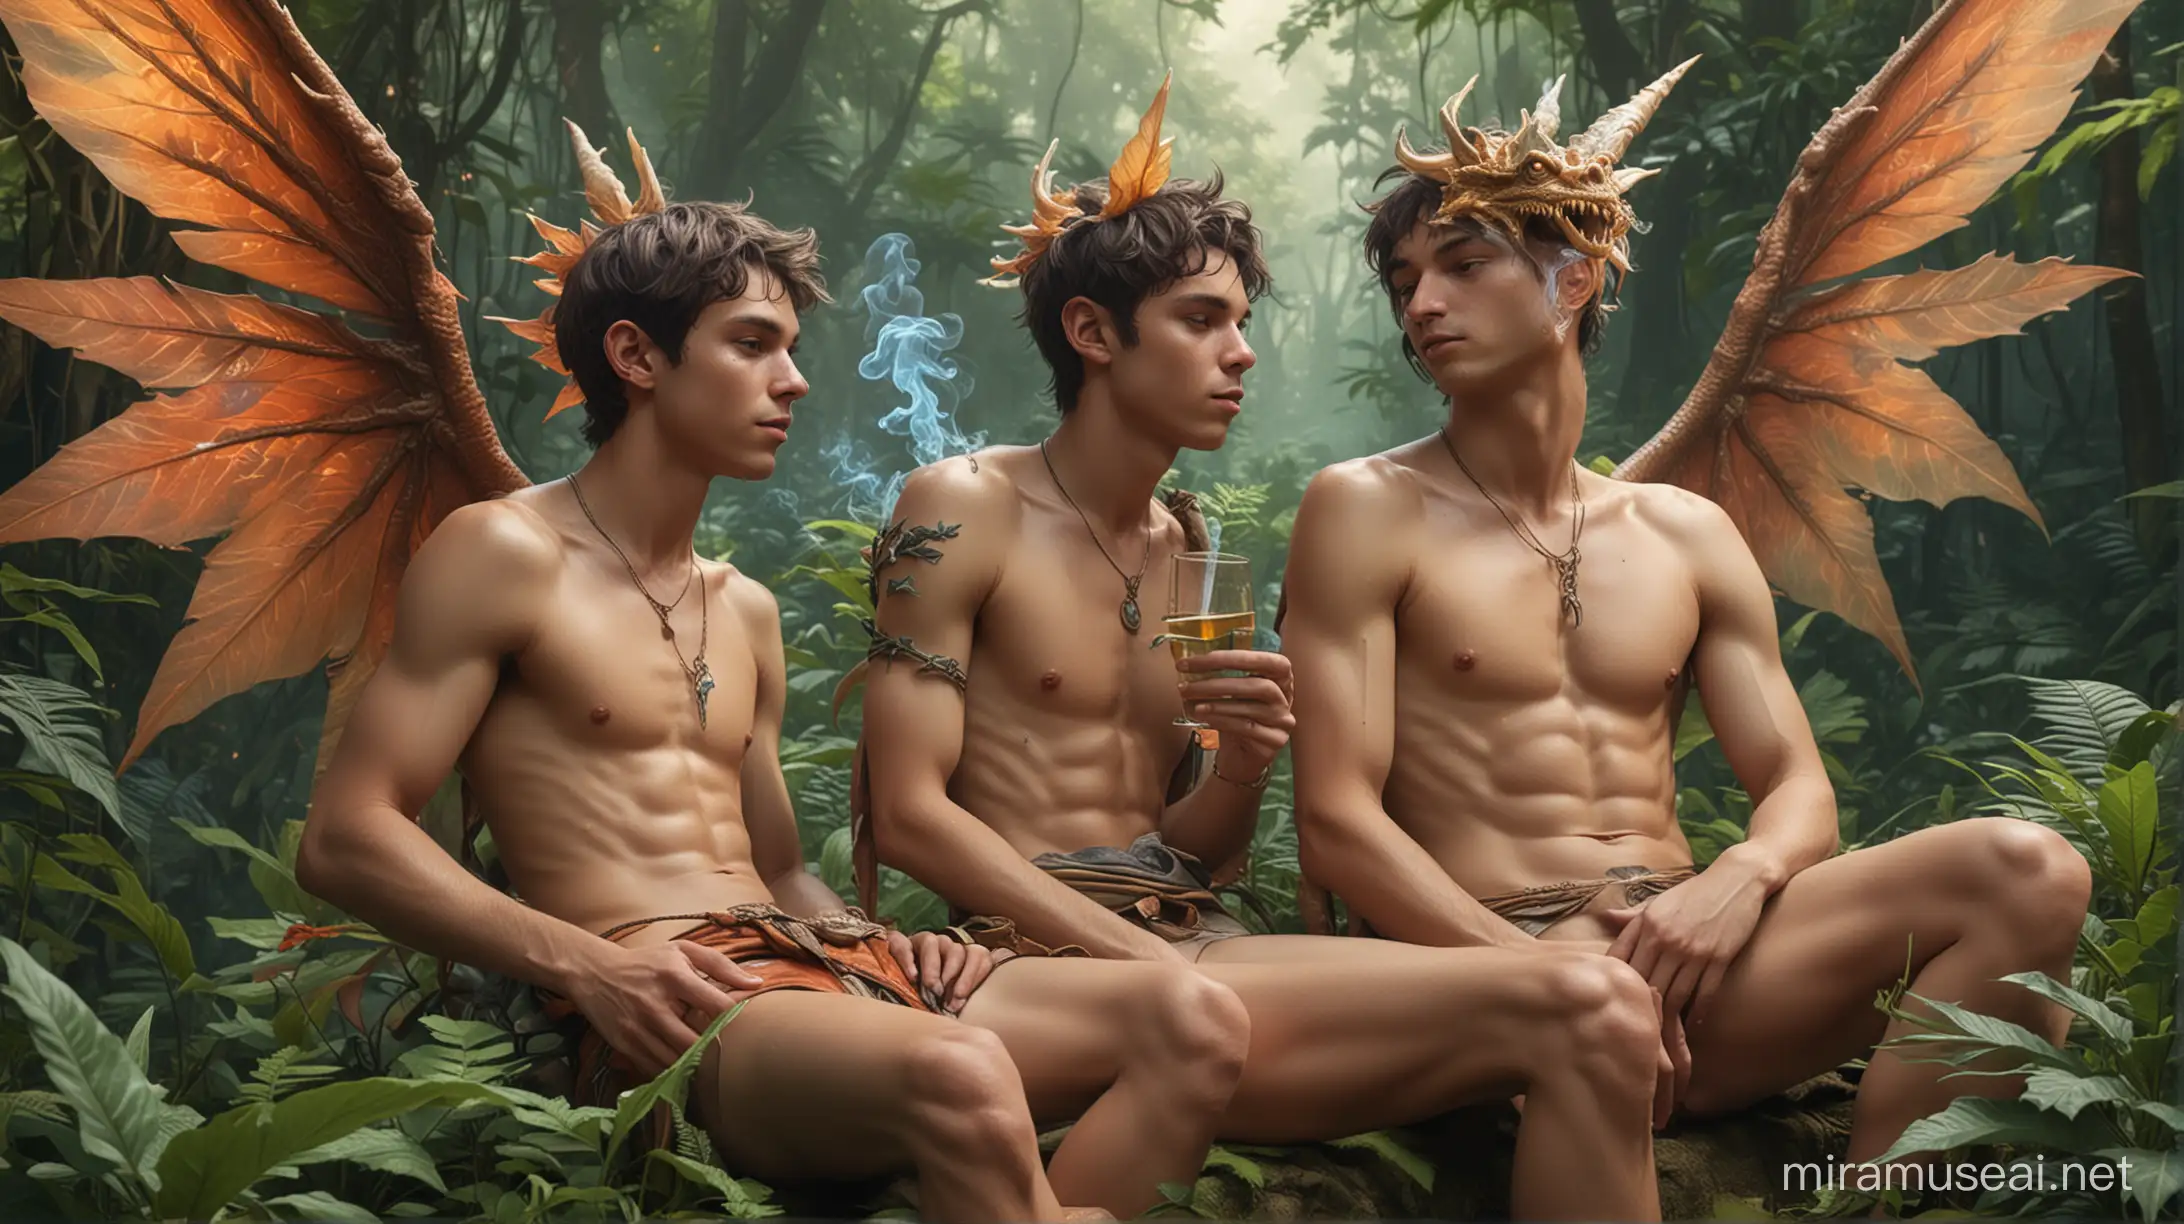 transparant glass, psychedelic, shirtless, sexy, anthropomorphic dragon boy teens with wings and horns, foliage loincloth, having a smoke break in lush cannabis jungle, mushrooms, adorable boy, trending on artstation, masterpiece